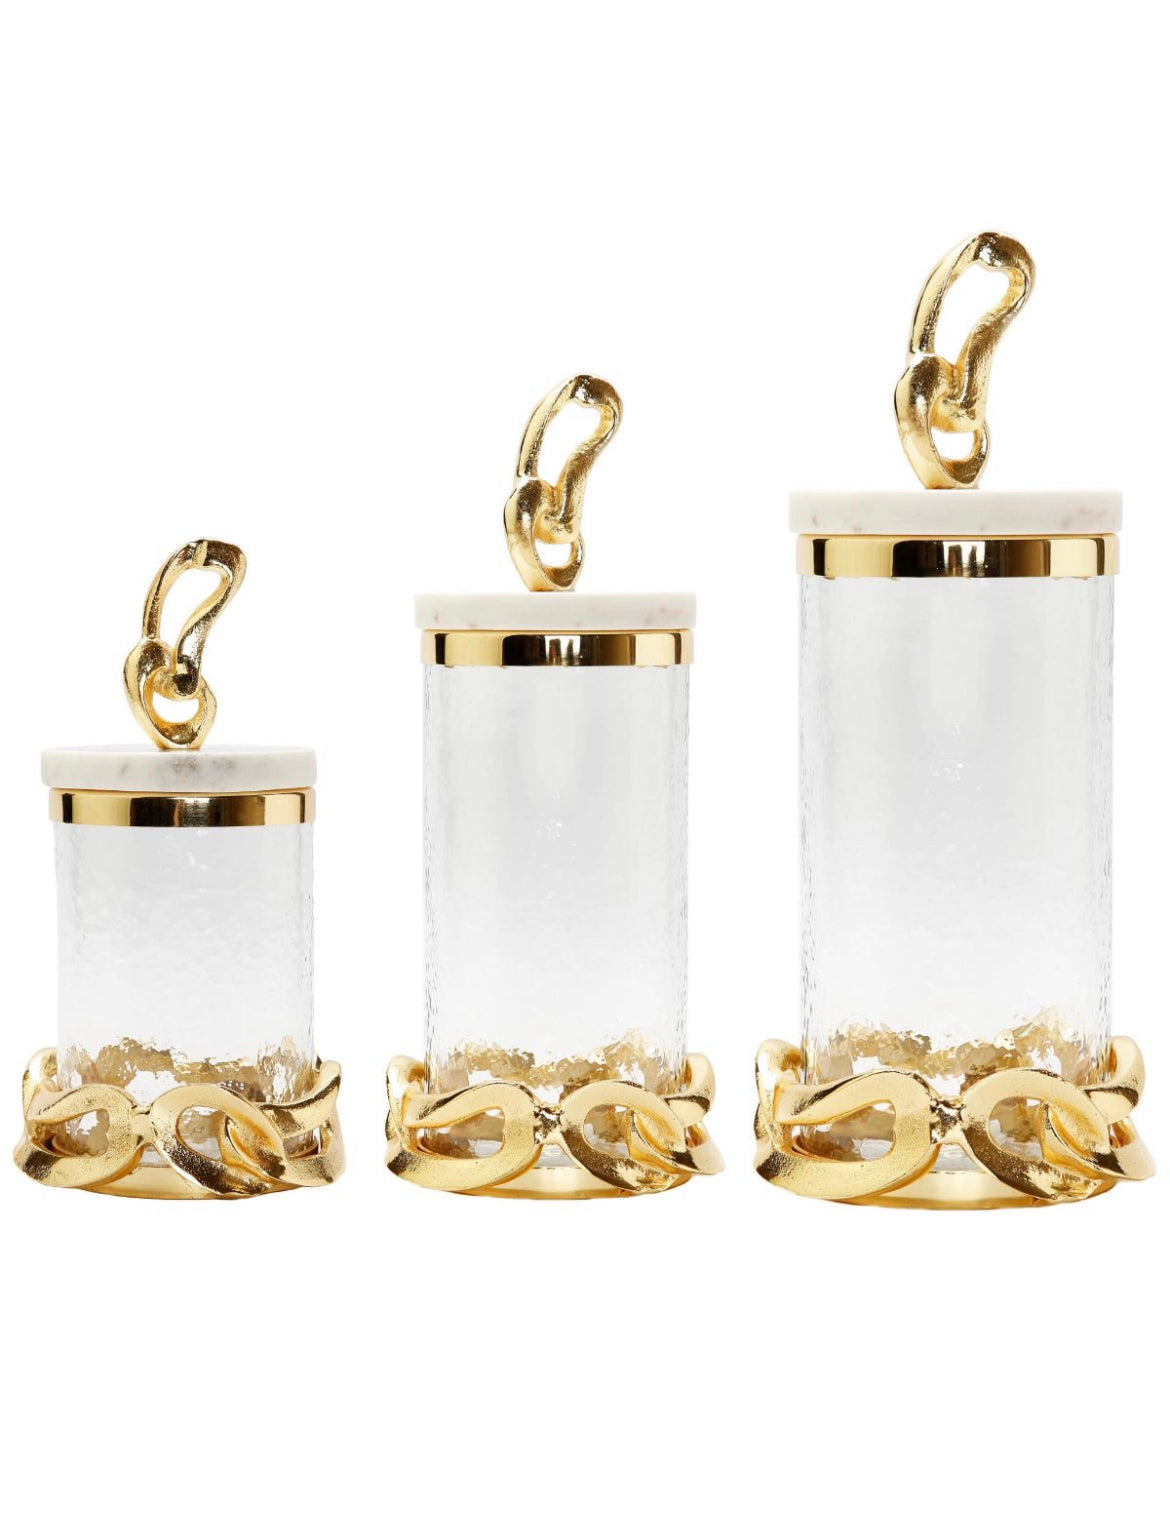 The Catena D’ Oro Glass Canisters has a beautiful gold chain design nestled at the bottom and top with a Marble Lid  available in 3 Sizes from KYA Home Decor